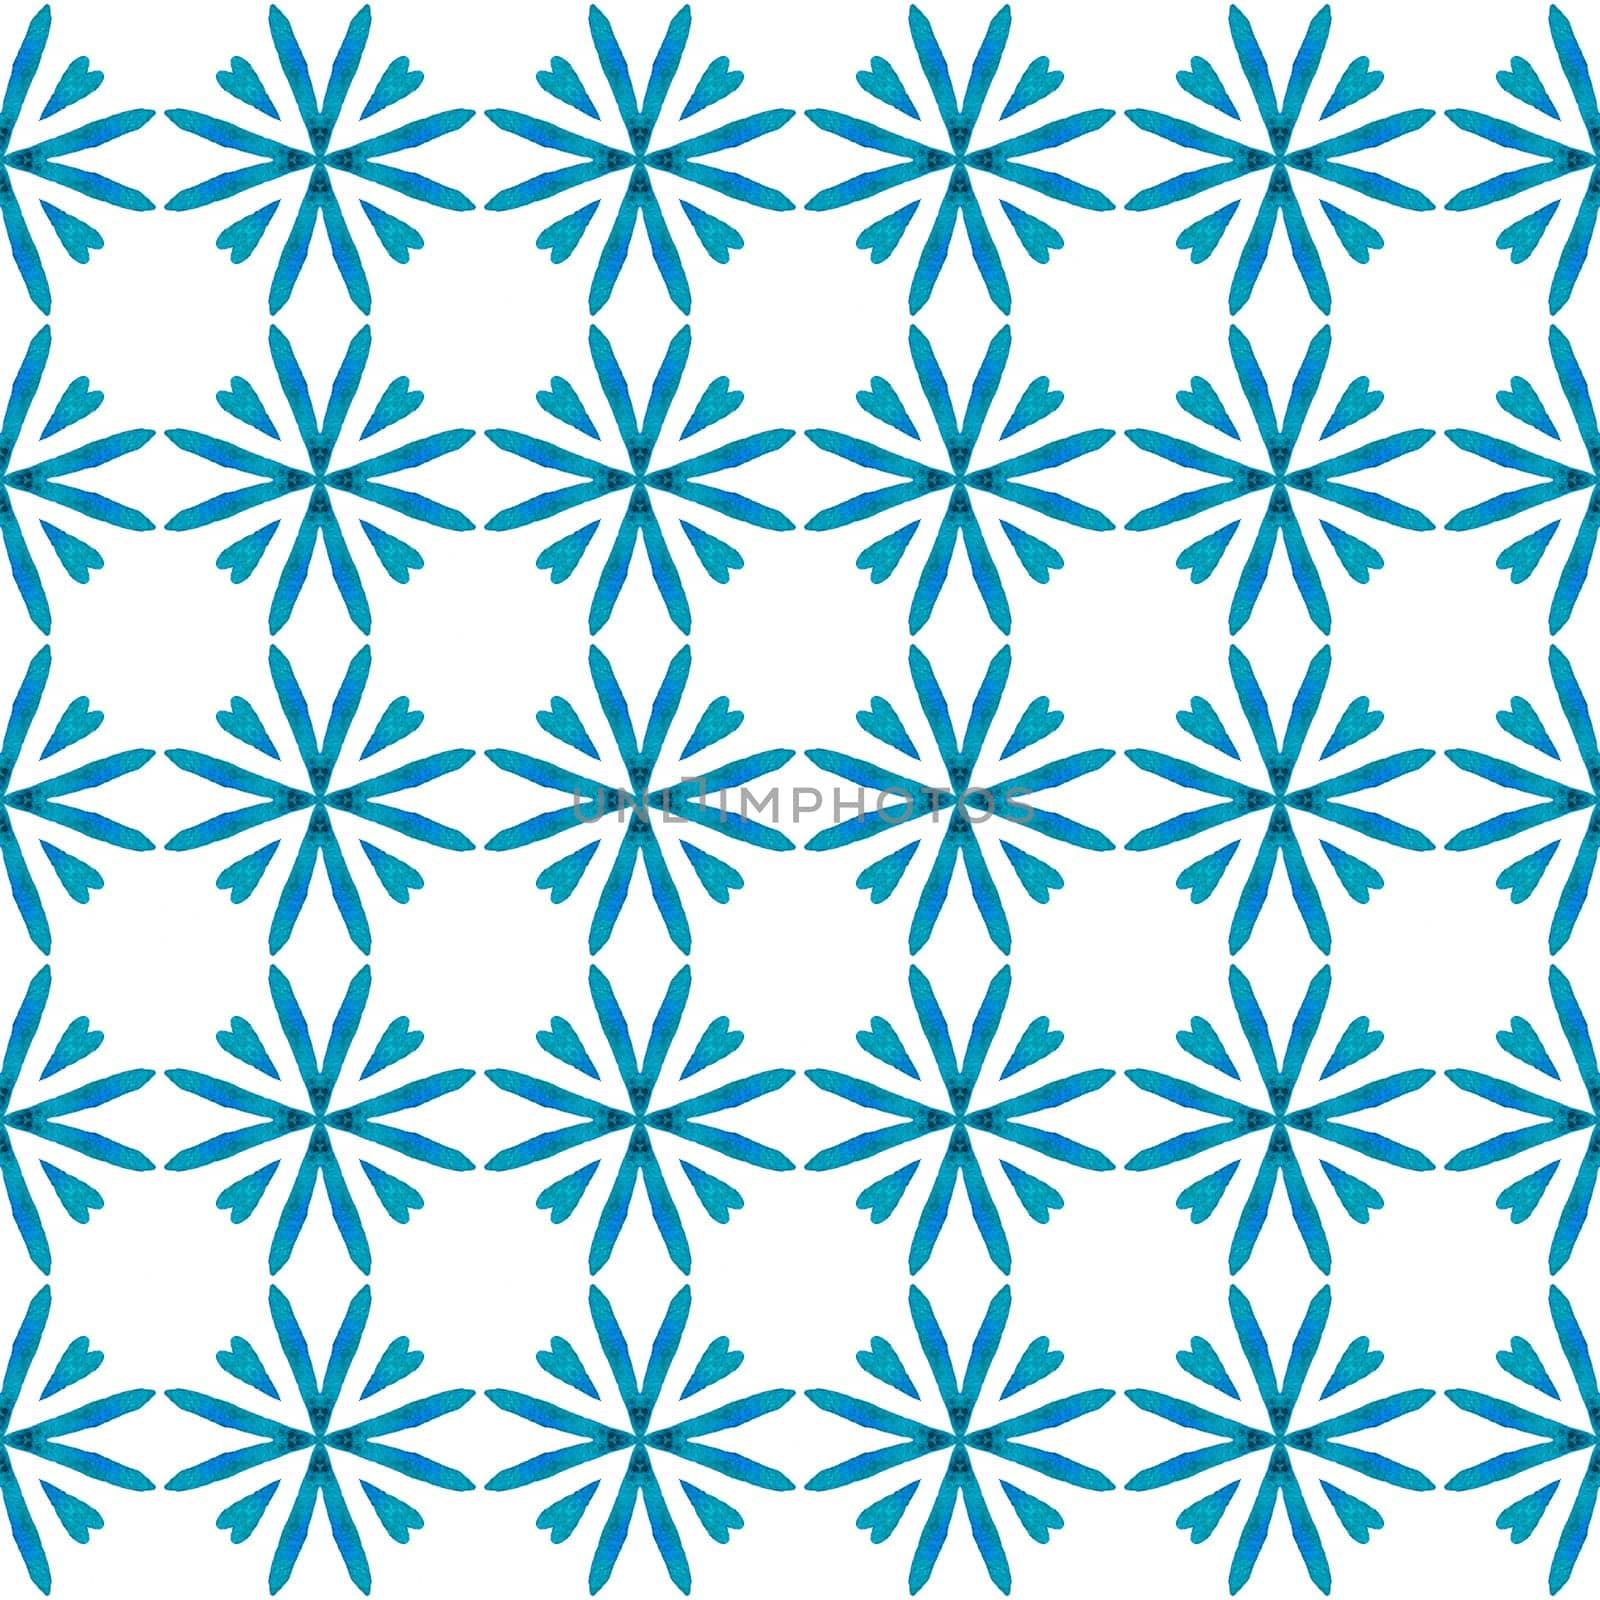 Textile ready dramatic print, swimwear fabric, wallpaper, wrapping. Blue juicy boho chic summer design. Hand painted tiled watercolor border. Tiled watercolor background.